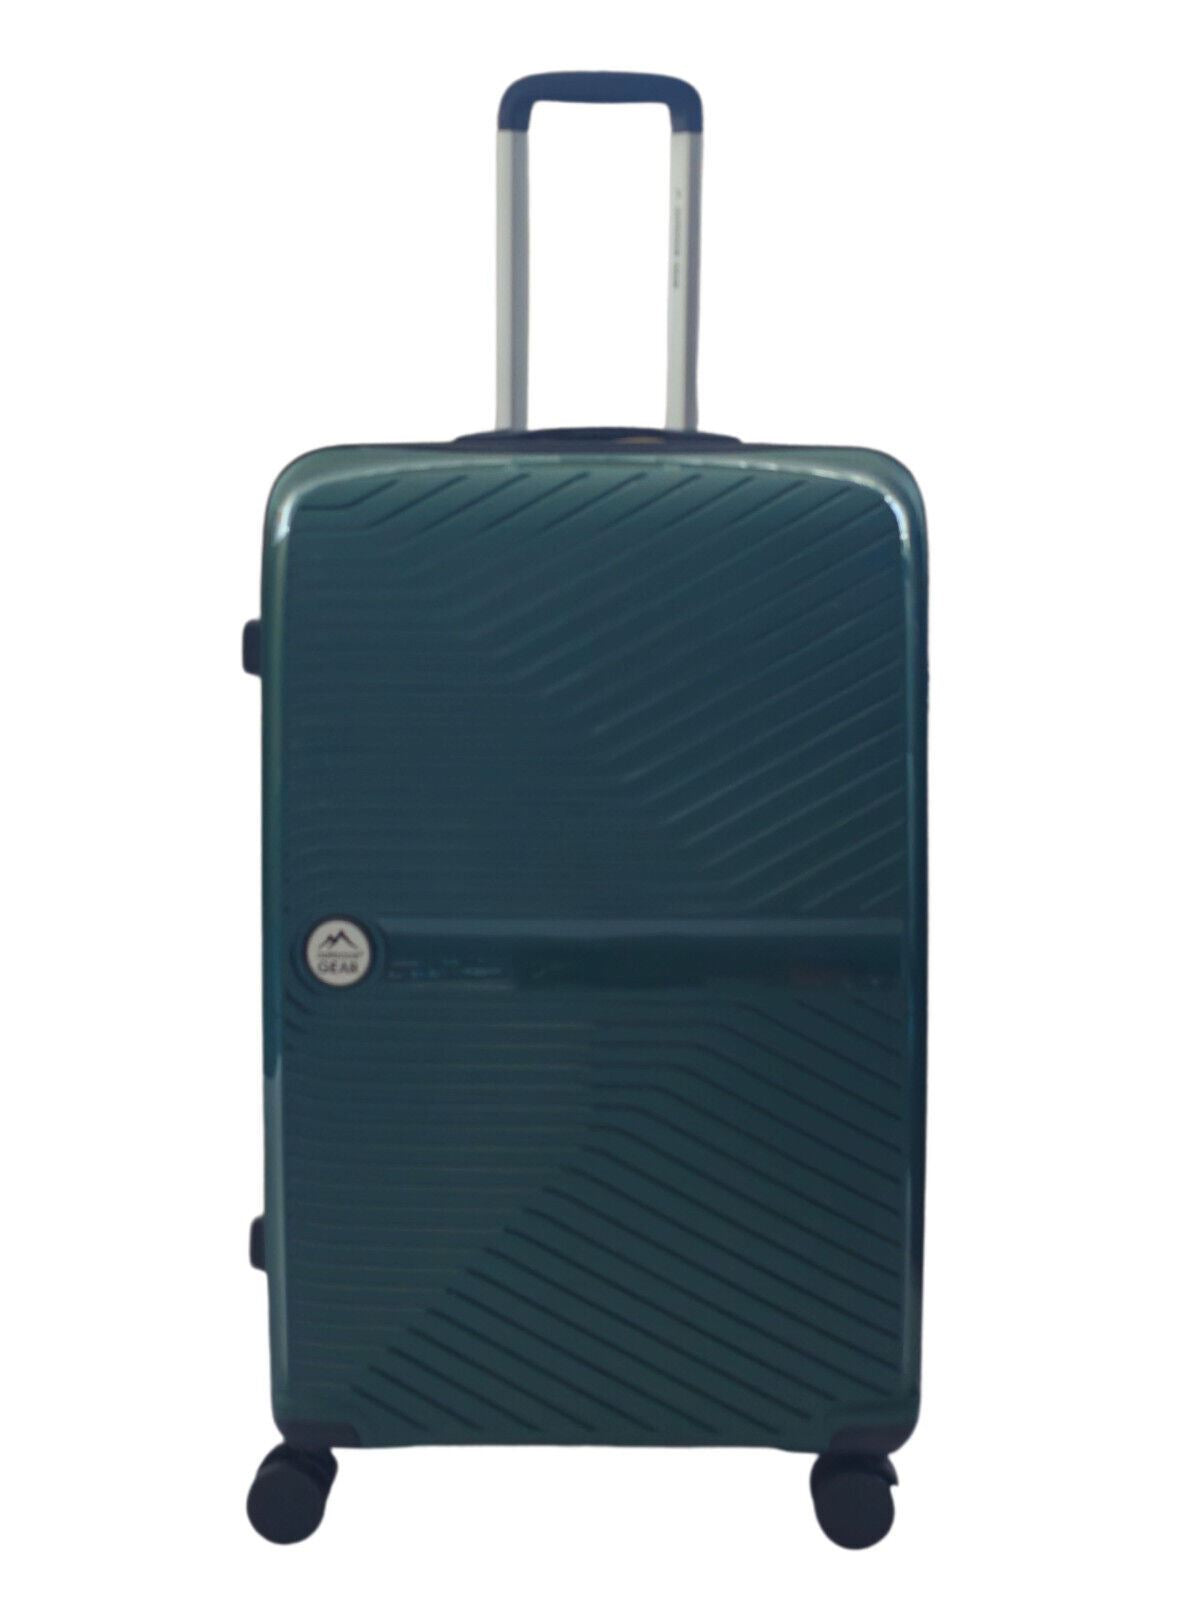 Abbeville Large Hard Shell Suitcase in Green